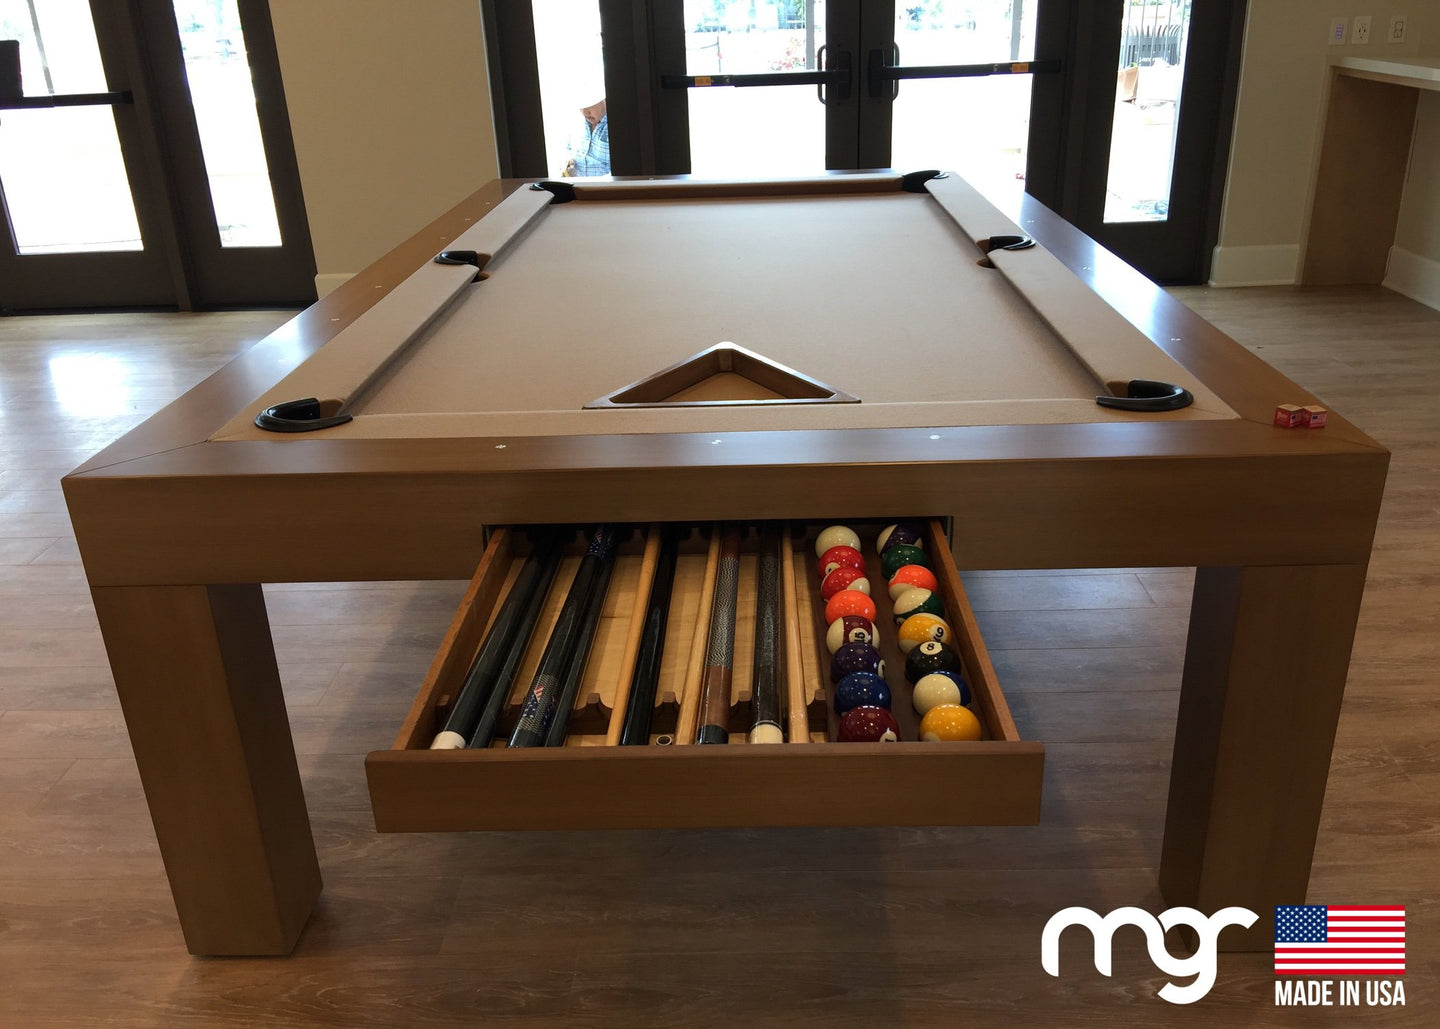 The Modern X31 Pool Table